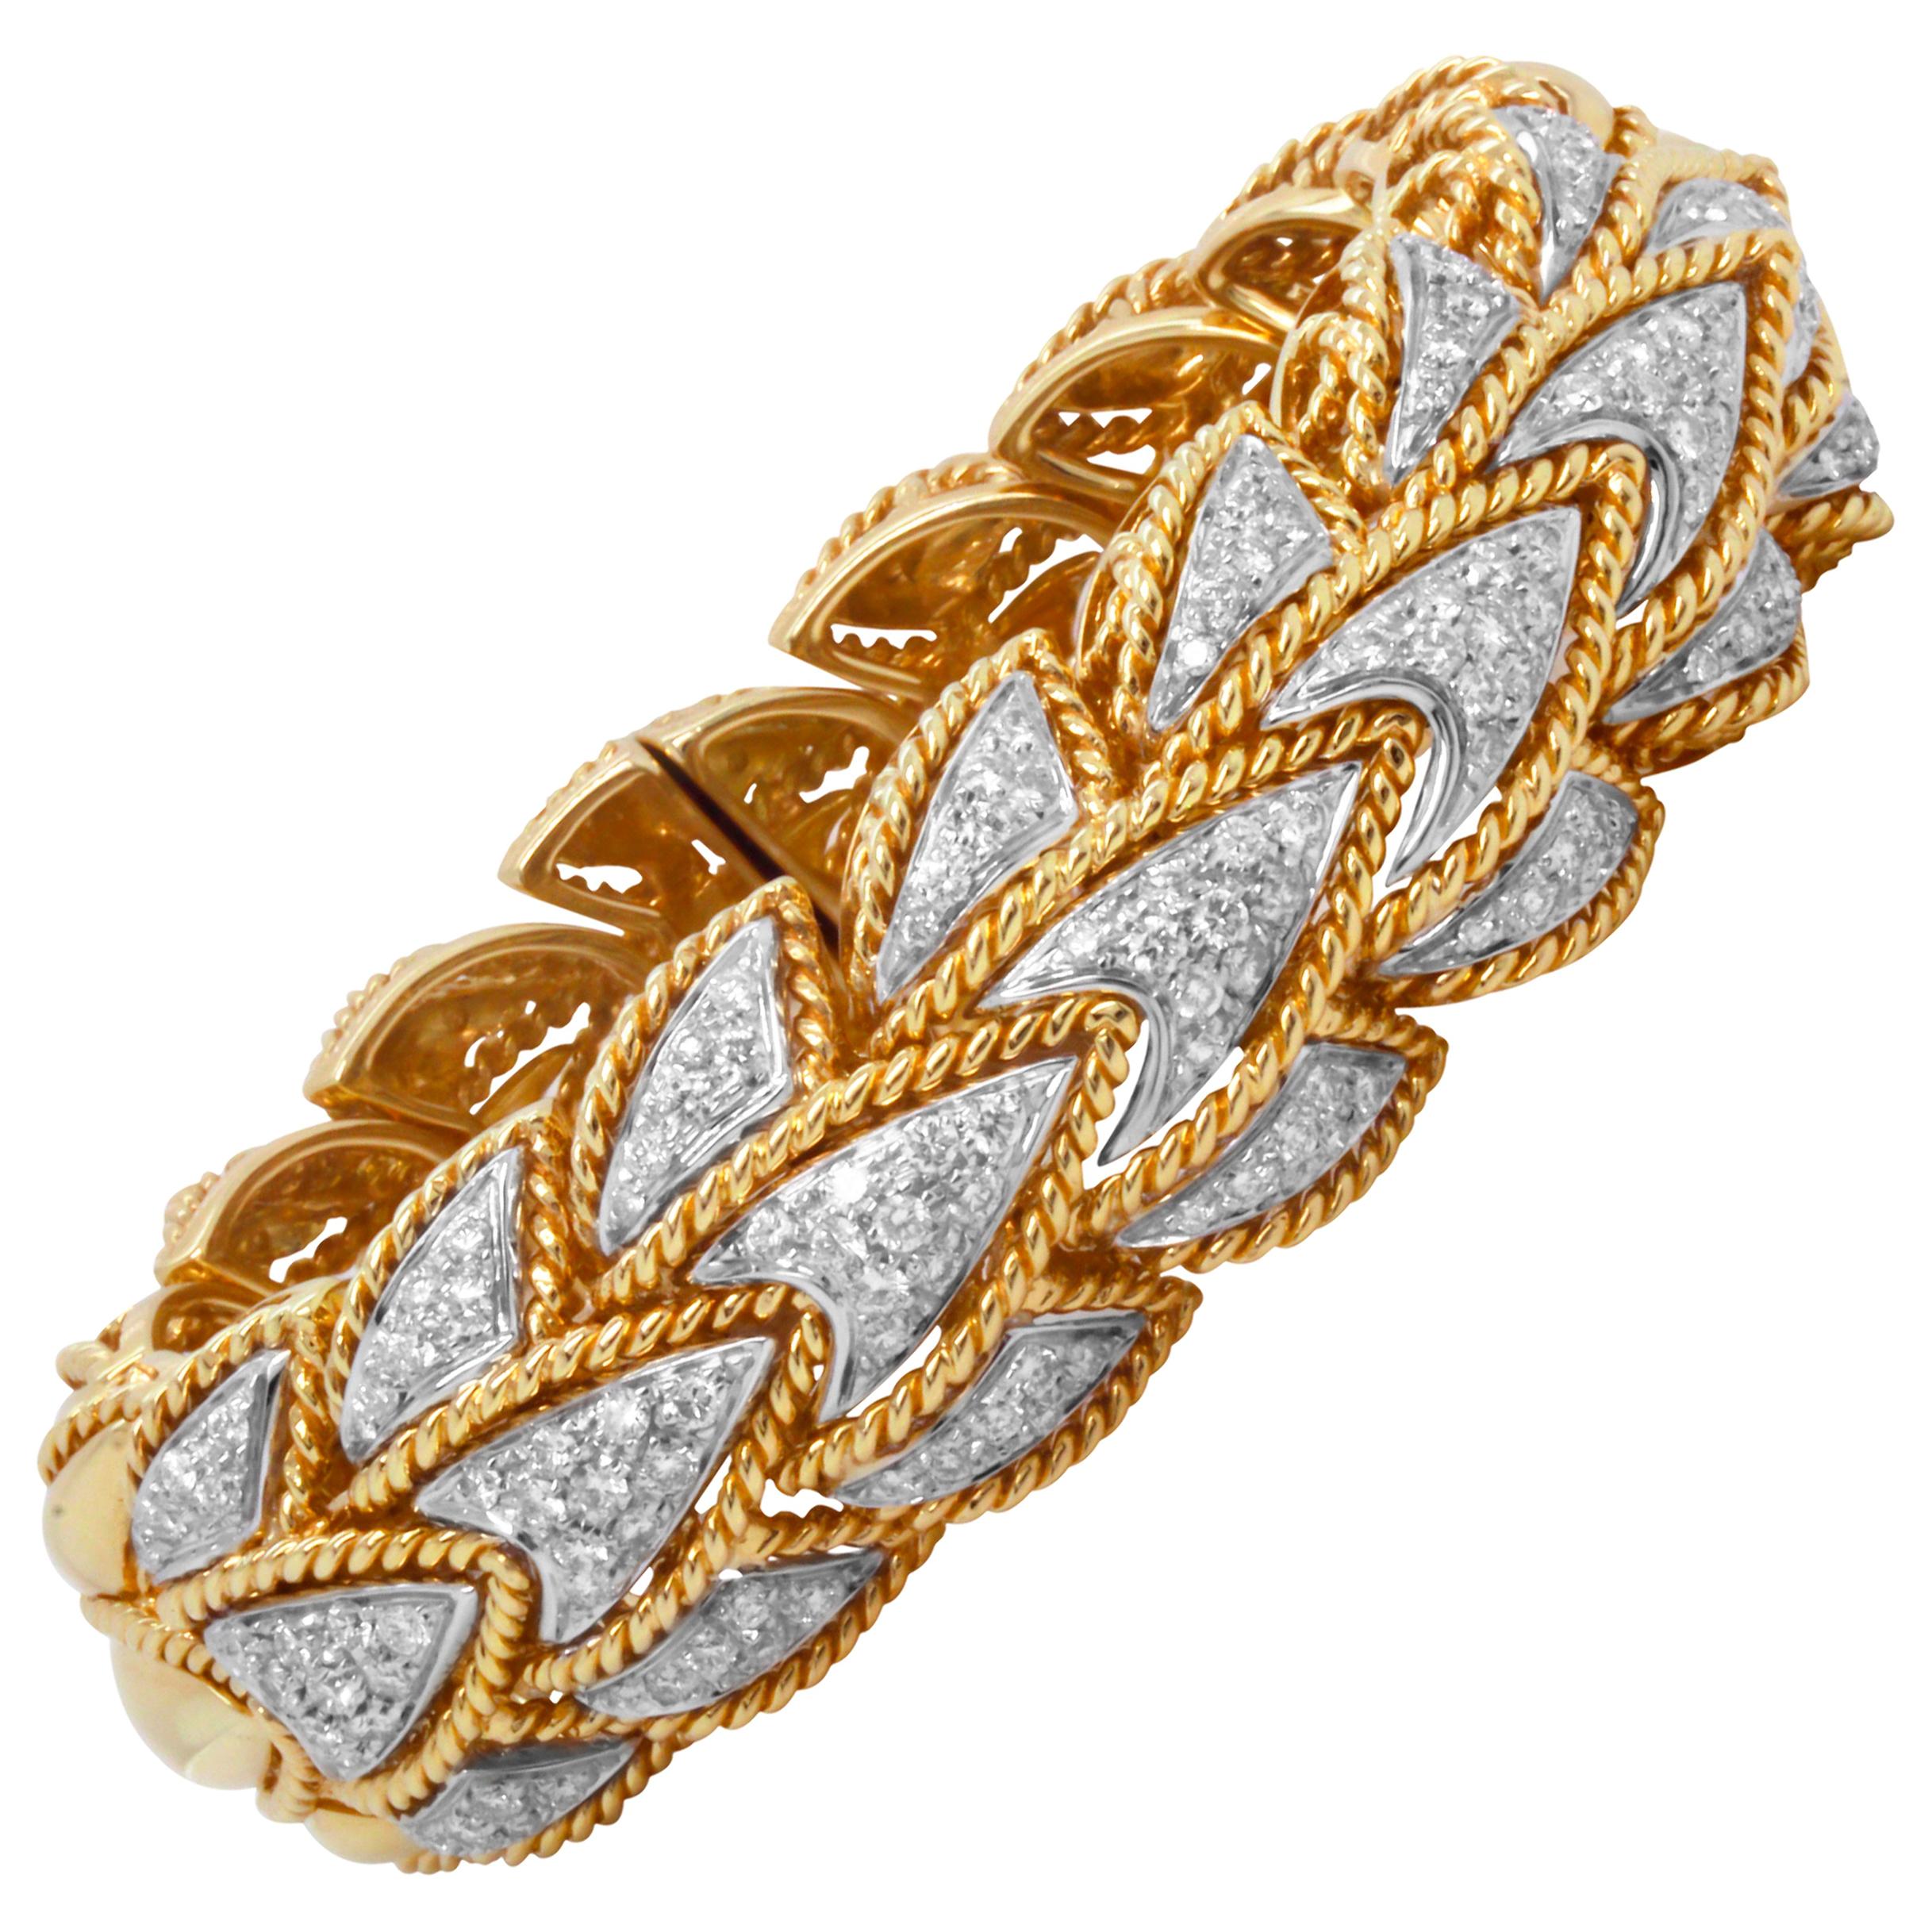 Yellow and White Gold Bangle Bracelet with Diamonds